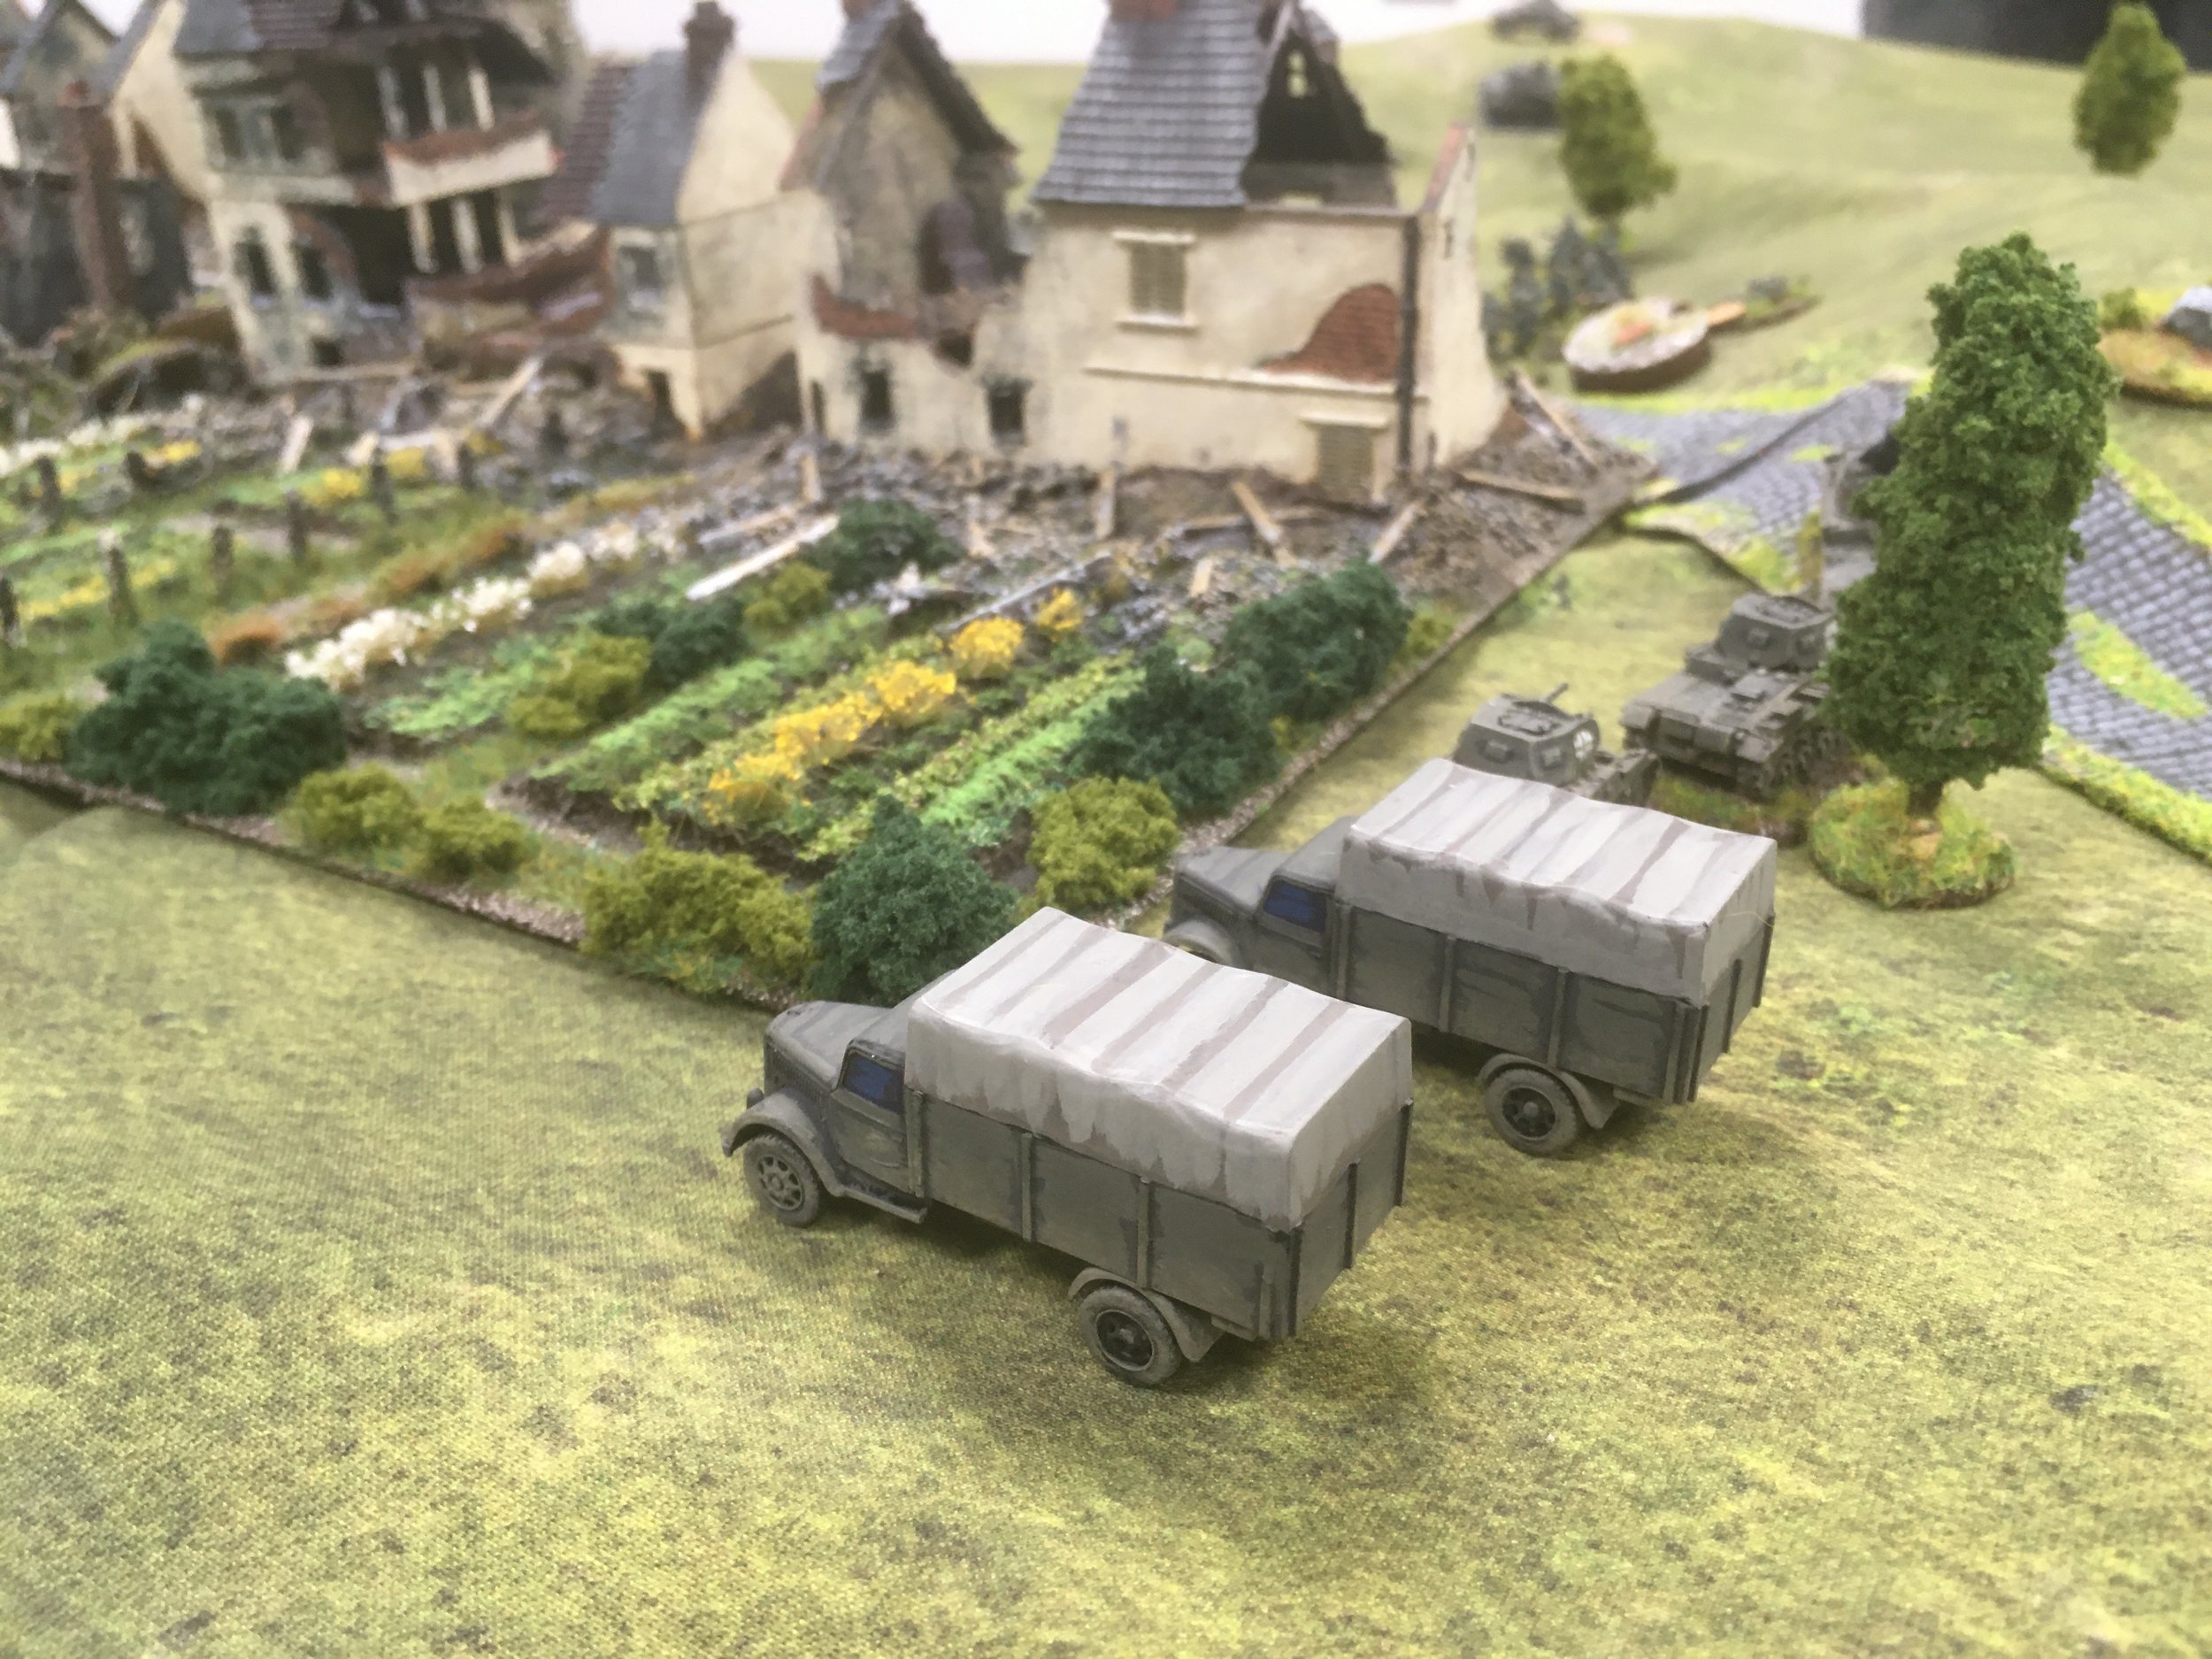 As two infantry platoons reach the outskirts of the town...